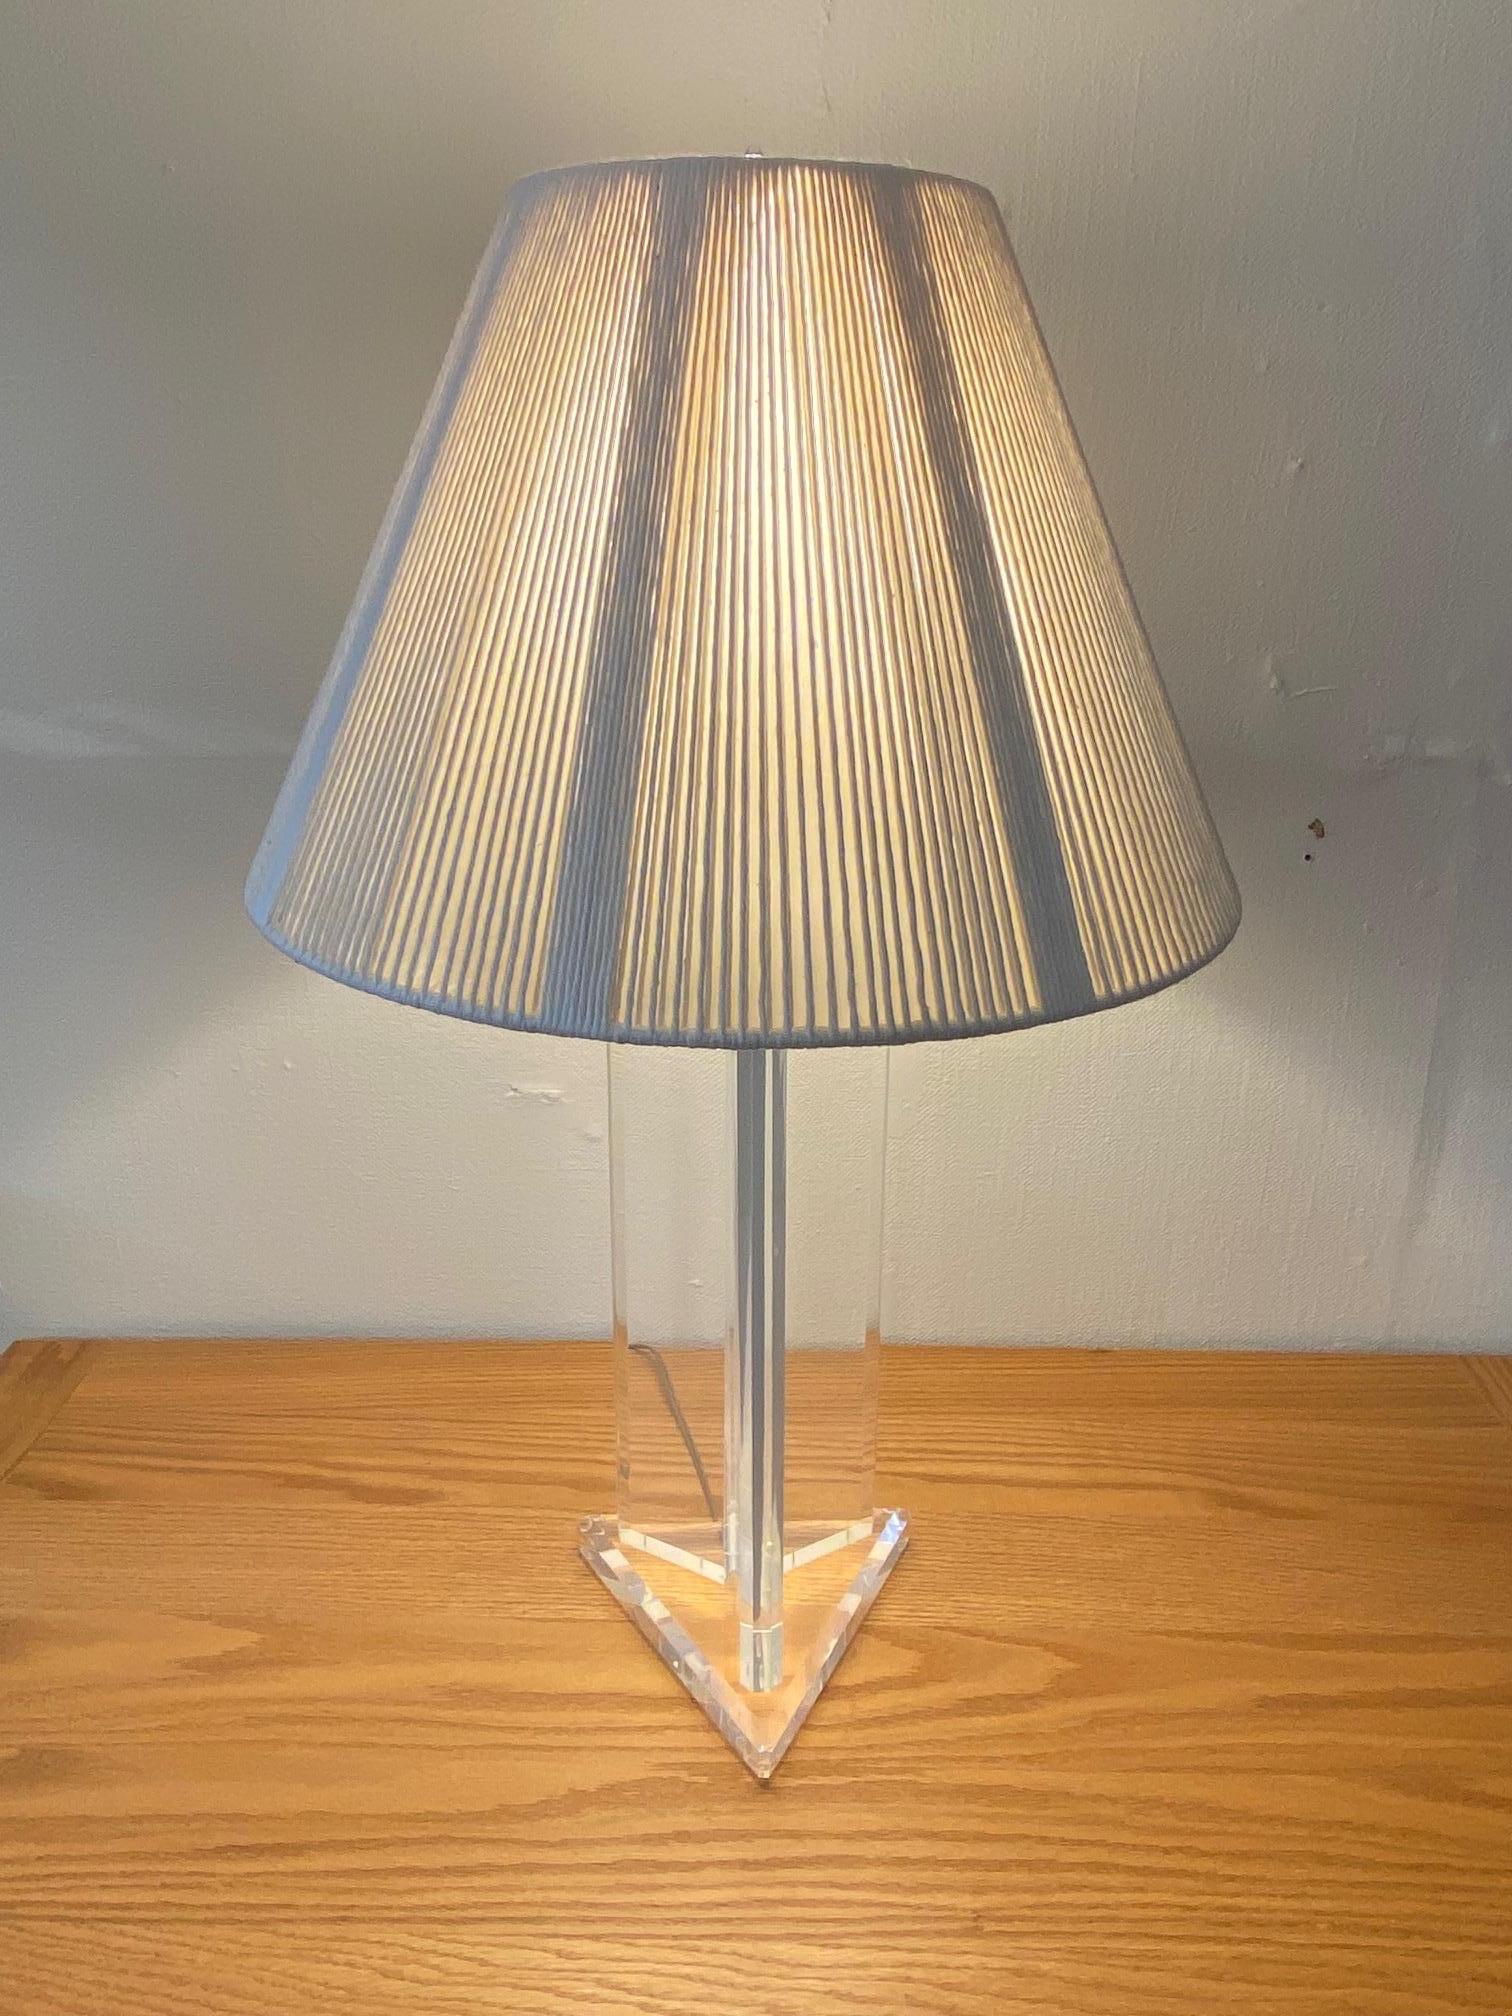 Late 20th Century Vintage Lucite Lamp with Original String Shade For Sale